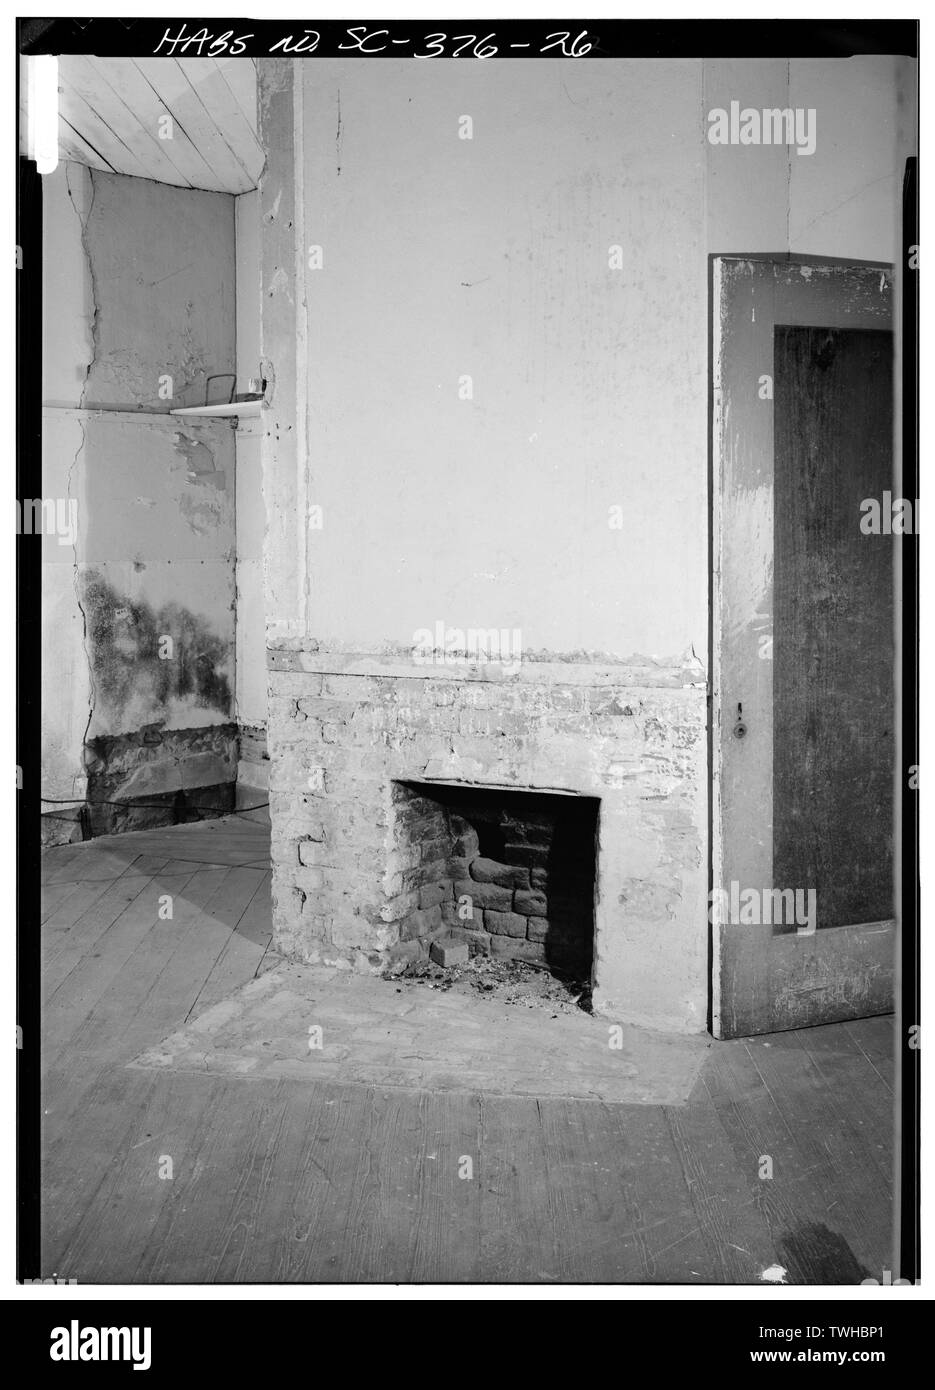 SAME VIEW AS SC-376-21, DIFFERENT ANGLE, NOTE HEARTH - Zelotes Holmes House, 619 East Main Street, Laurens, Laurens County, SC; Holmes, Zelotes; Cary, Brian, transmitter Stock Photo